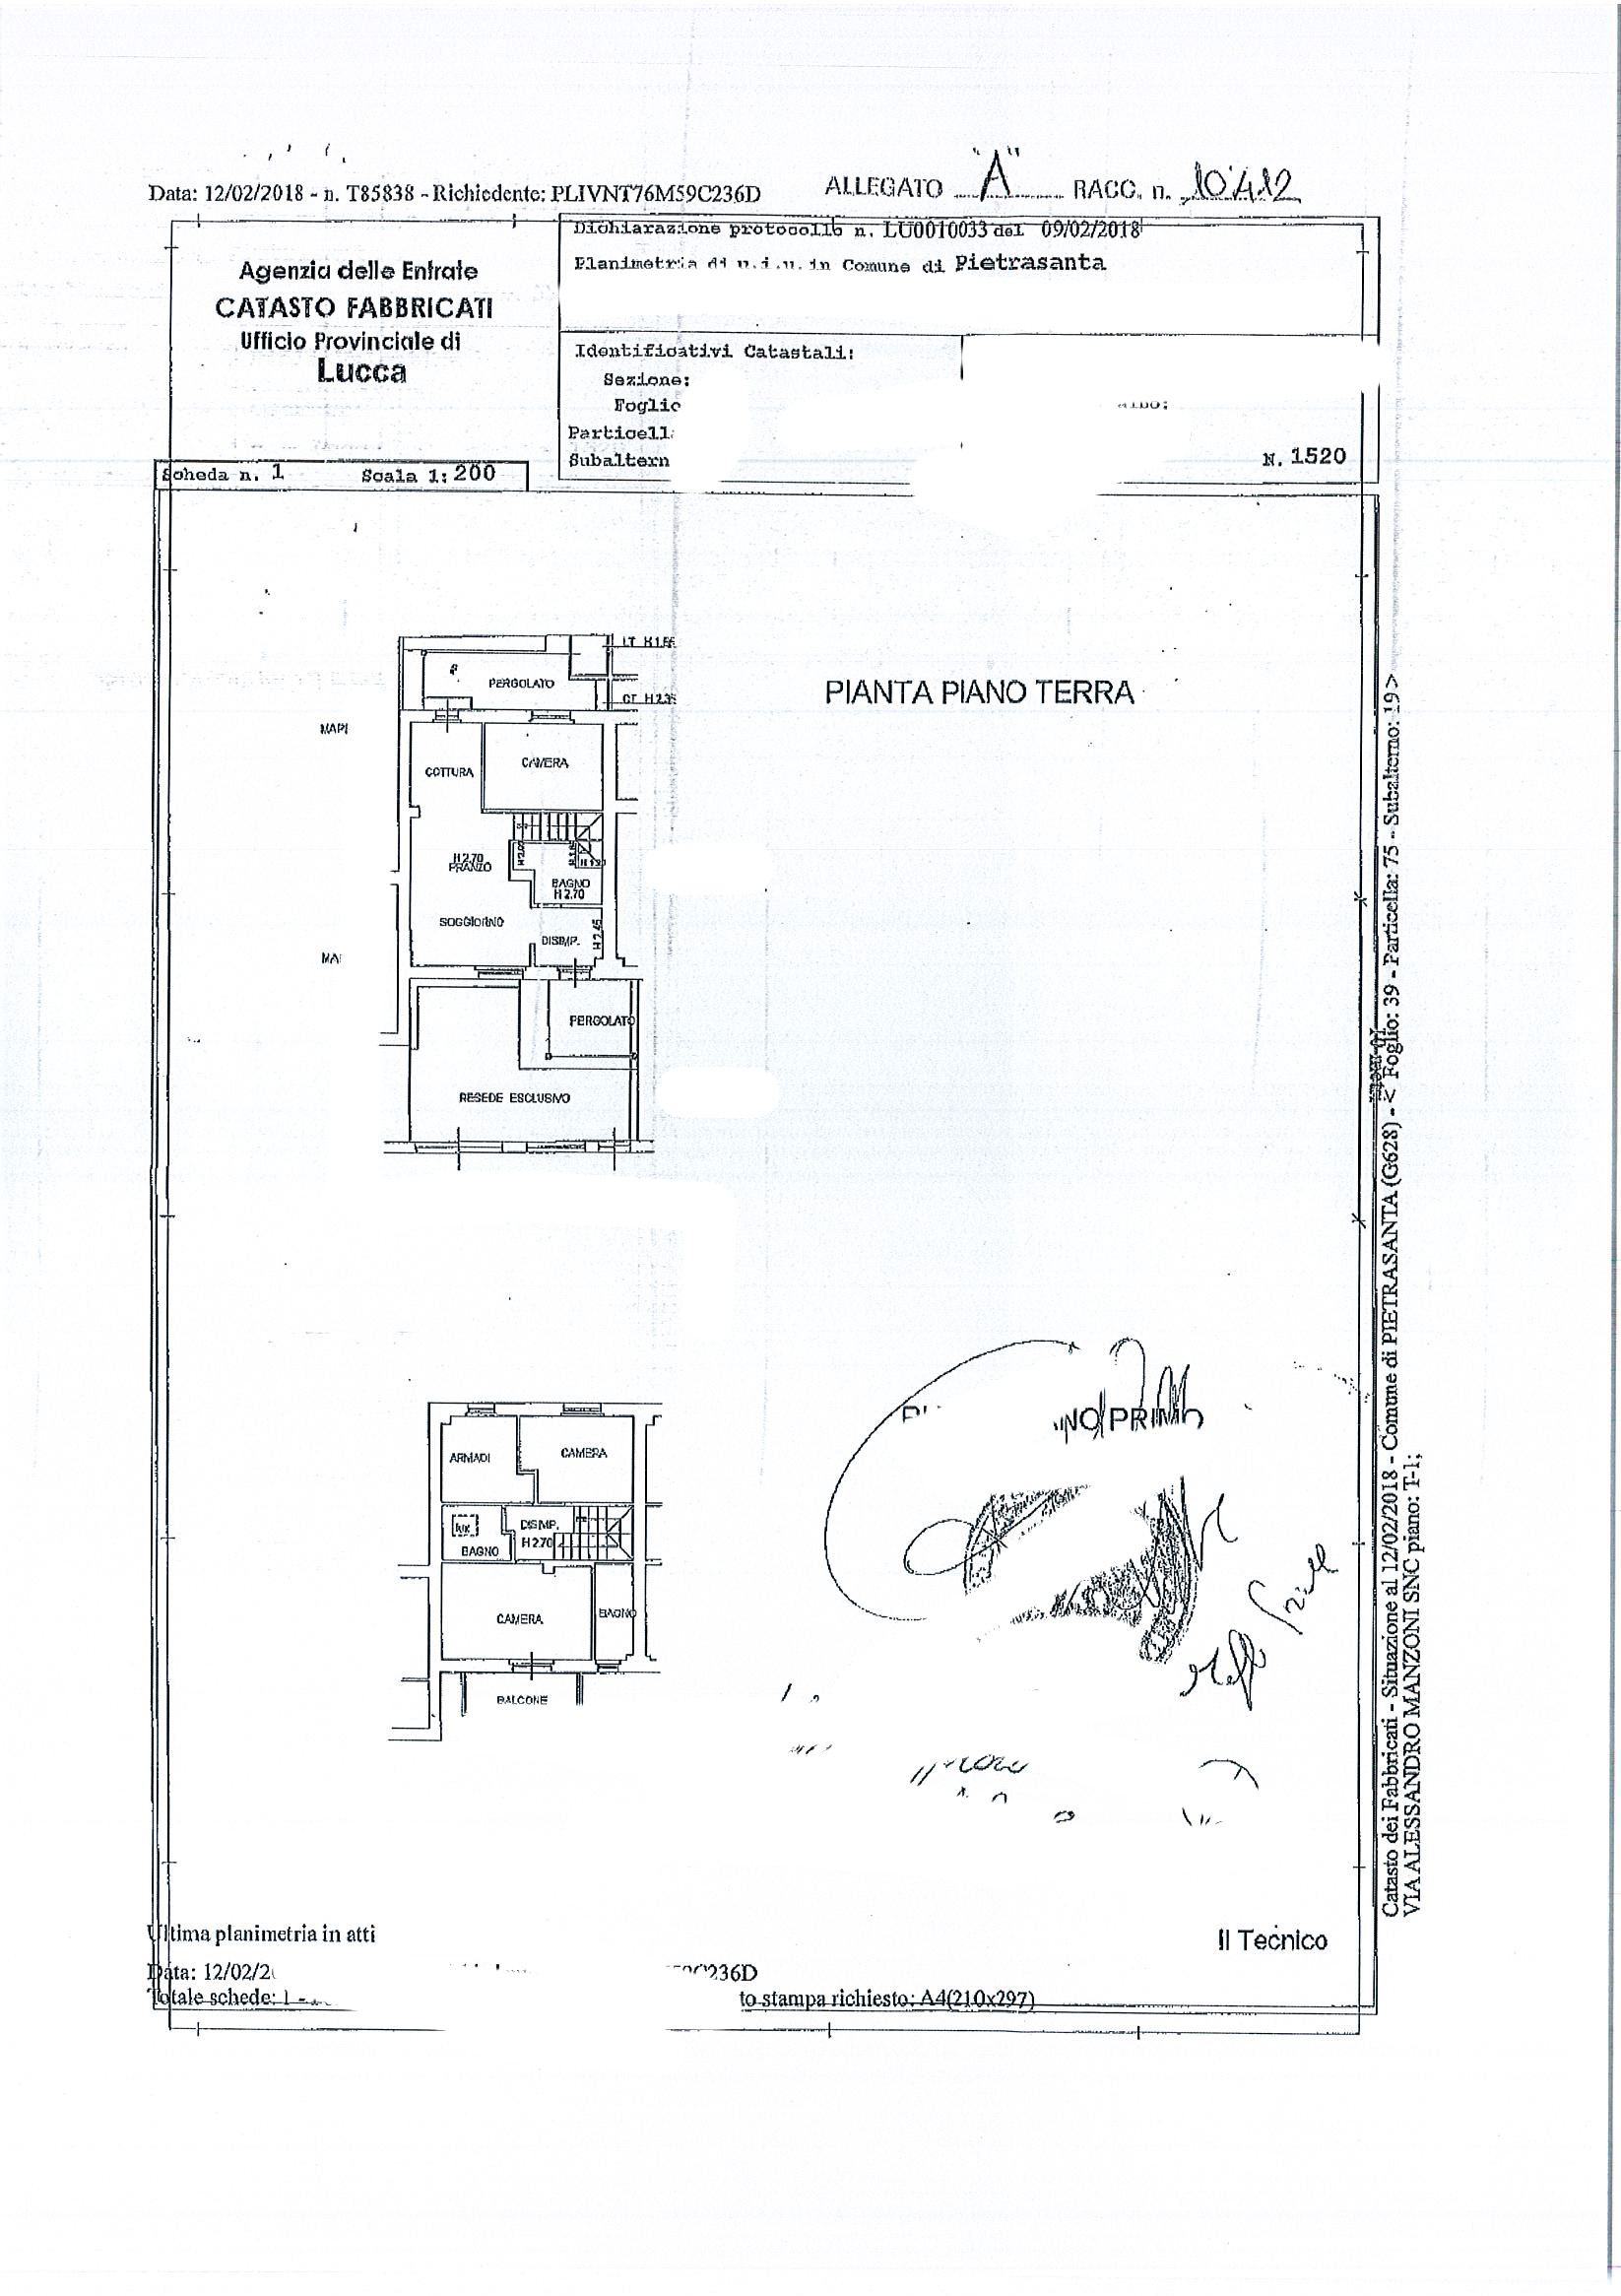 Three-family cottage for sale, ref. 27737 (Plan 1/1)